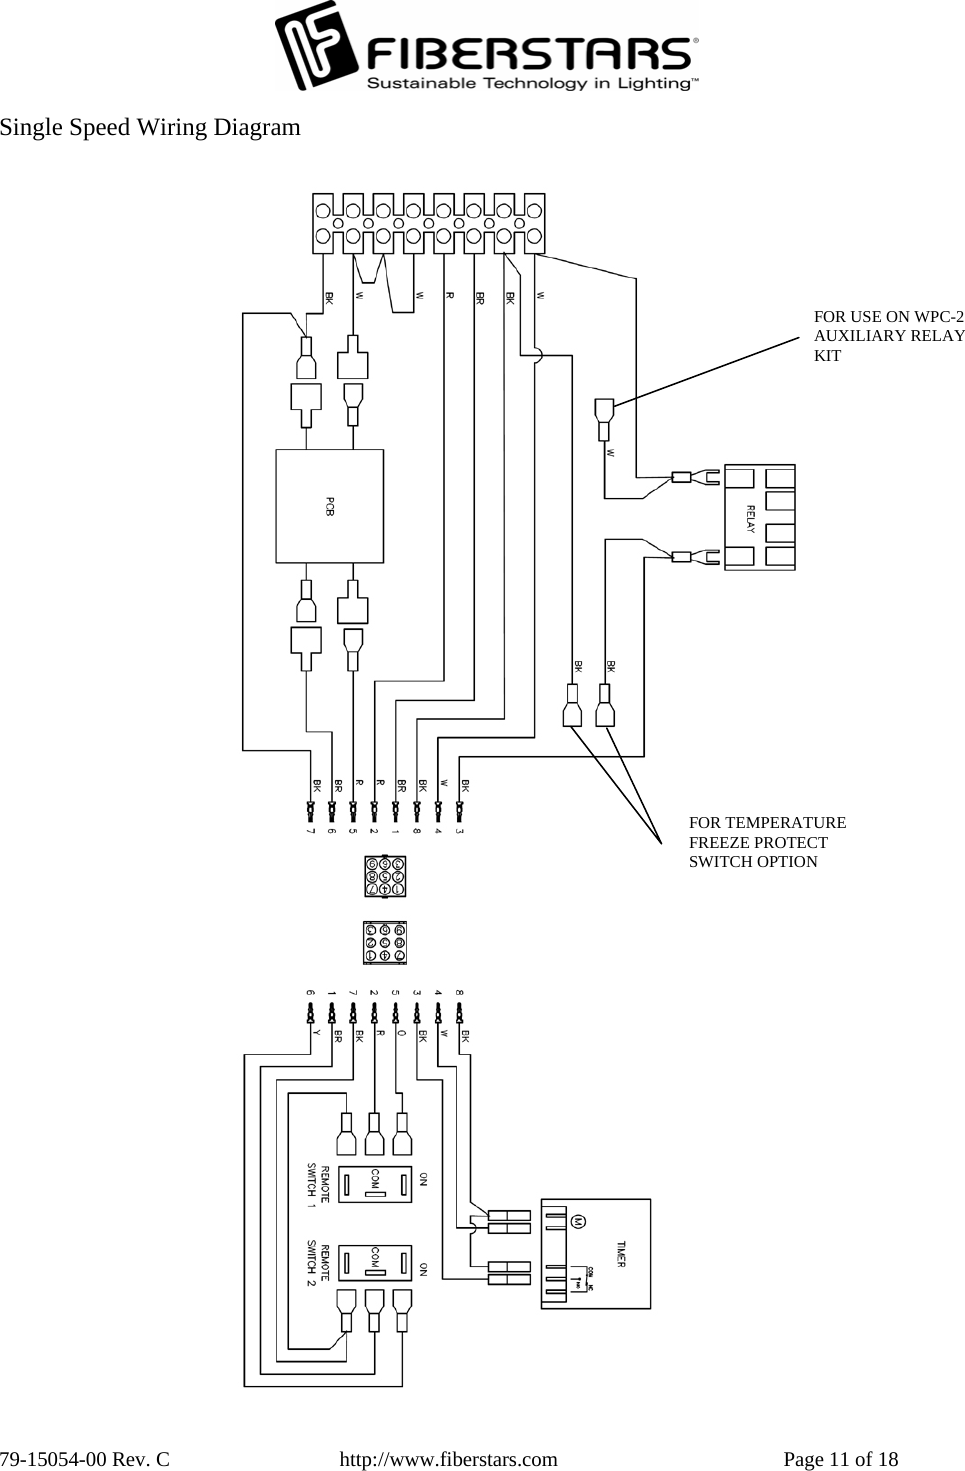  79-15054-00 Rev. C  http://www.fiberstars.com  Page 11 of 18 Single Speed Wiring Diagram FOR USE ON WPC-2 AUXILIARY RELAY KIT FOR TEMPERATURE FREEZE PROTECT SWITCH OPTION 